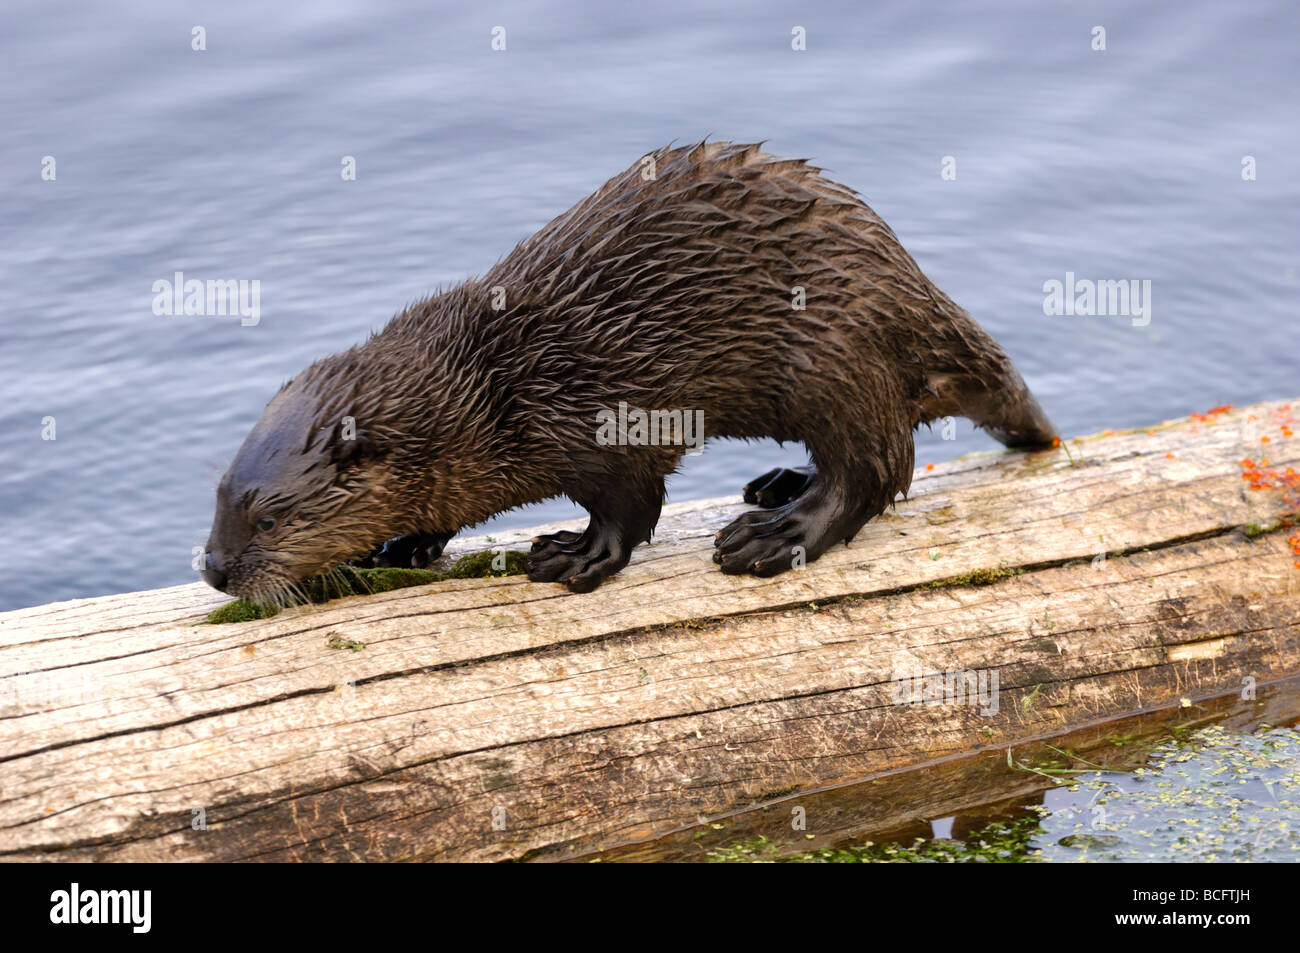 Stock photo of a river otter pup sniffing, and walking along a log, Yellowstone National Park, 2009. Stock Photo